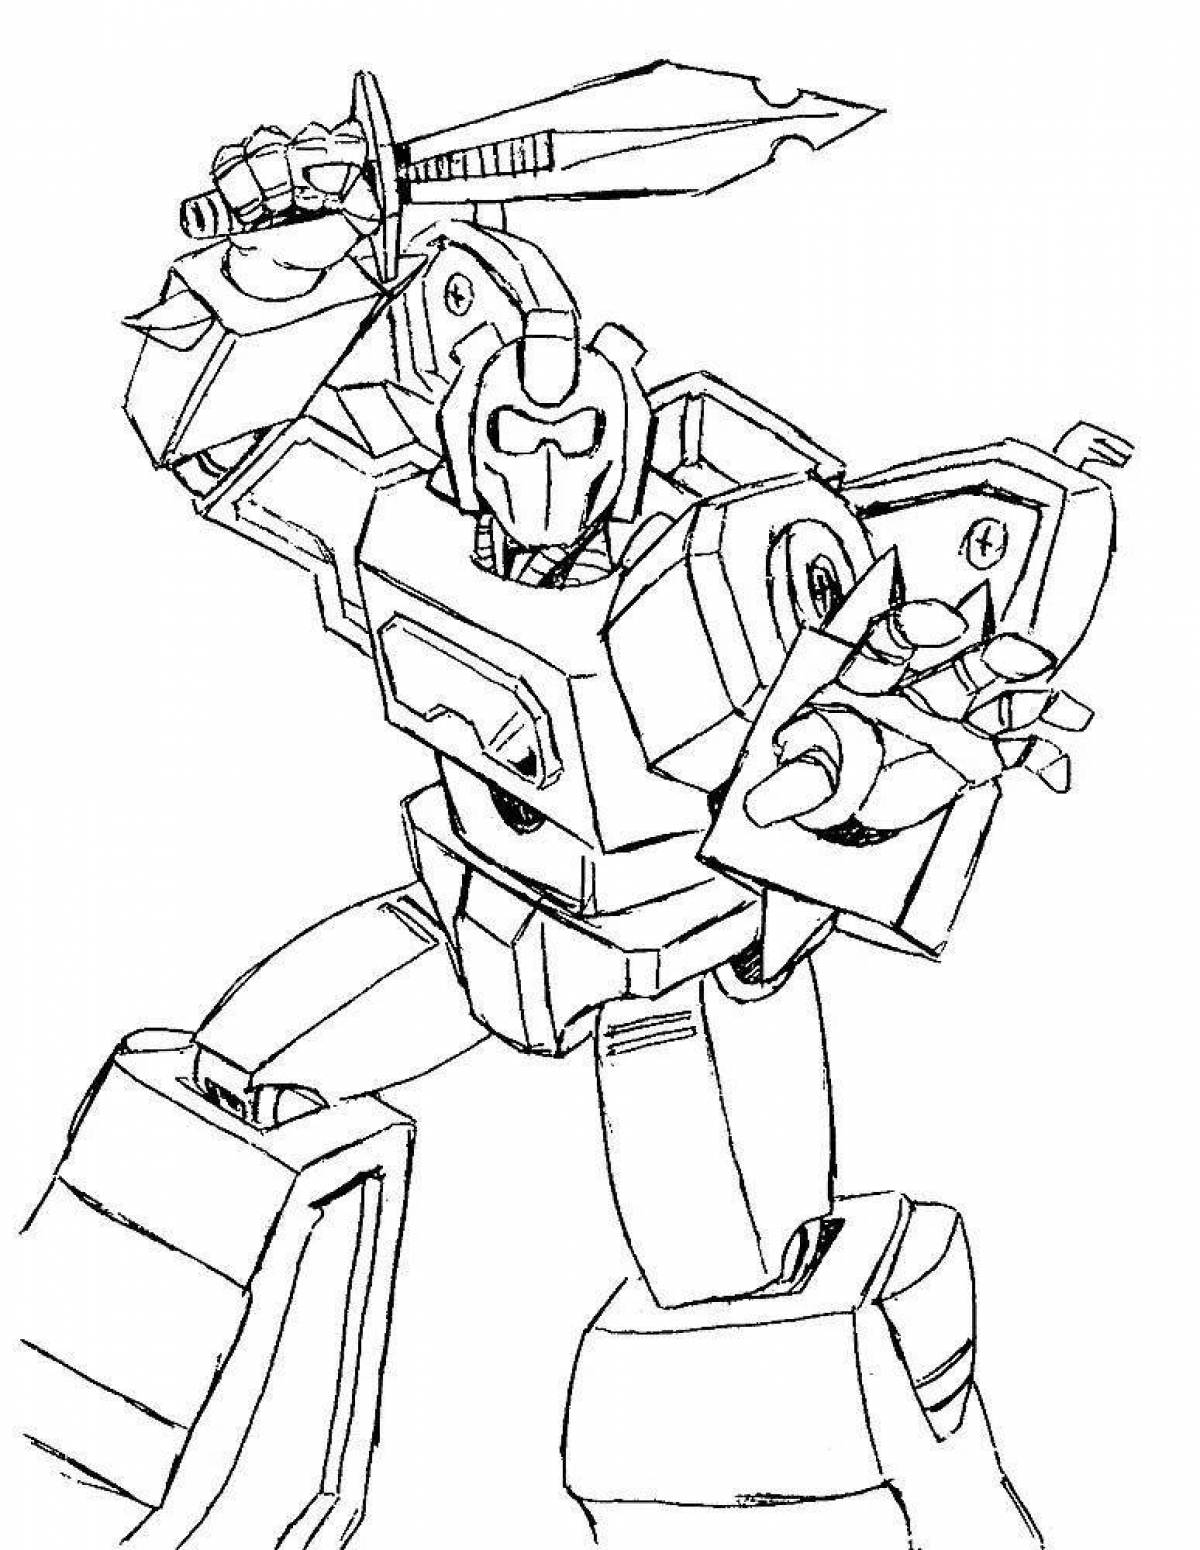 Animated bumblebee robot coloring page